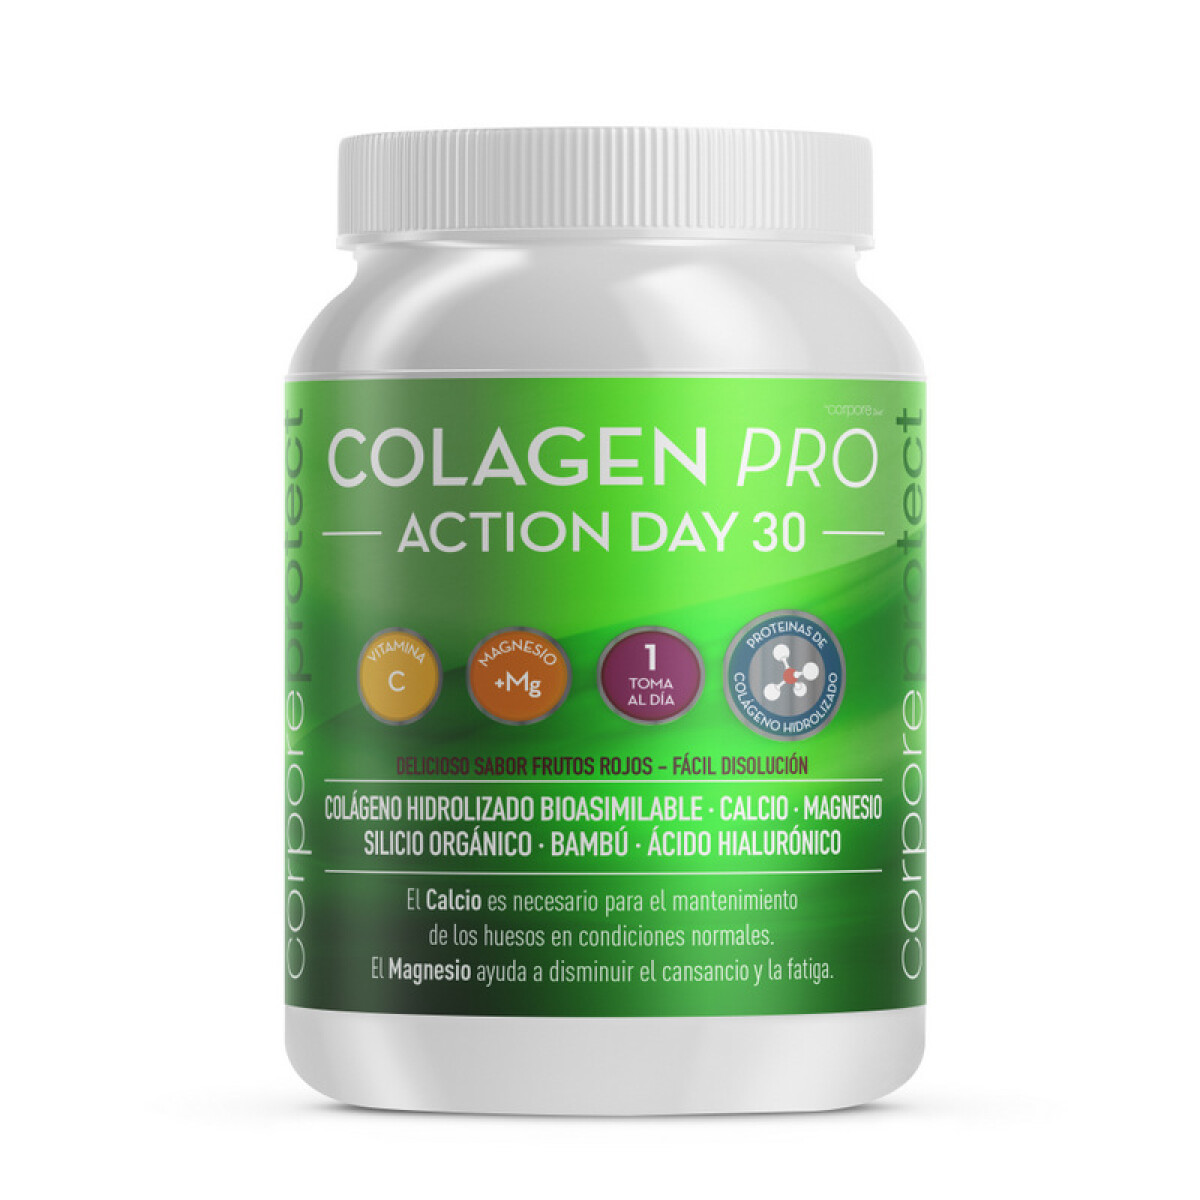 Colagen Pro ACTION DAY 30 